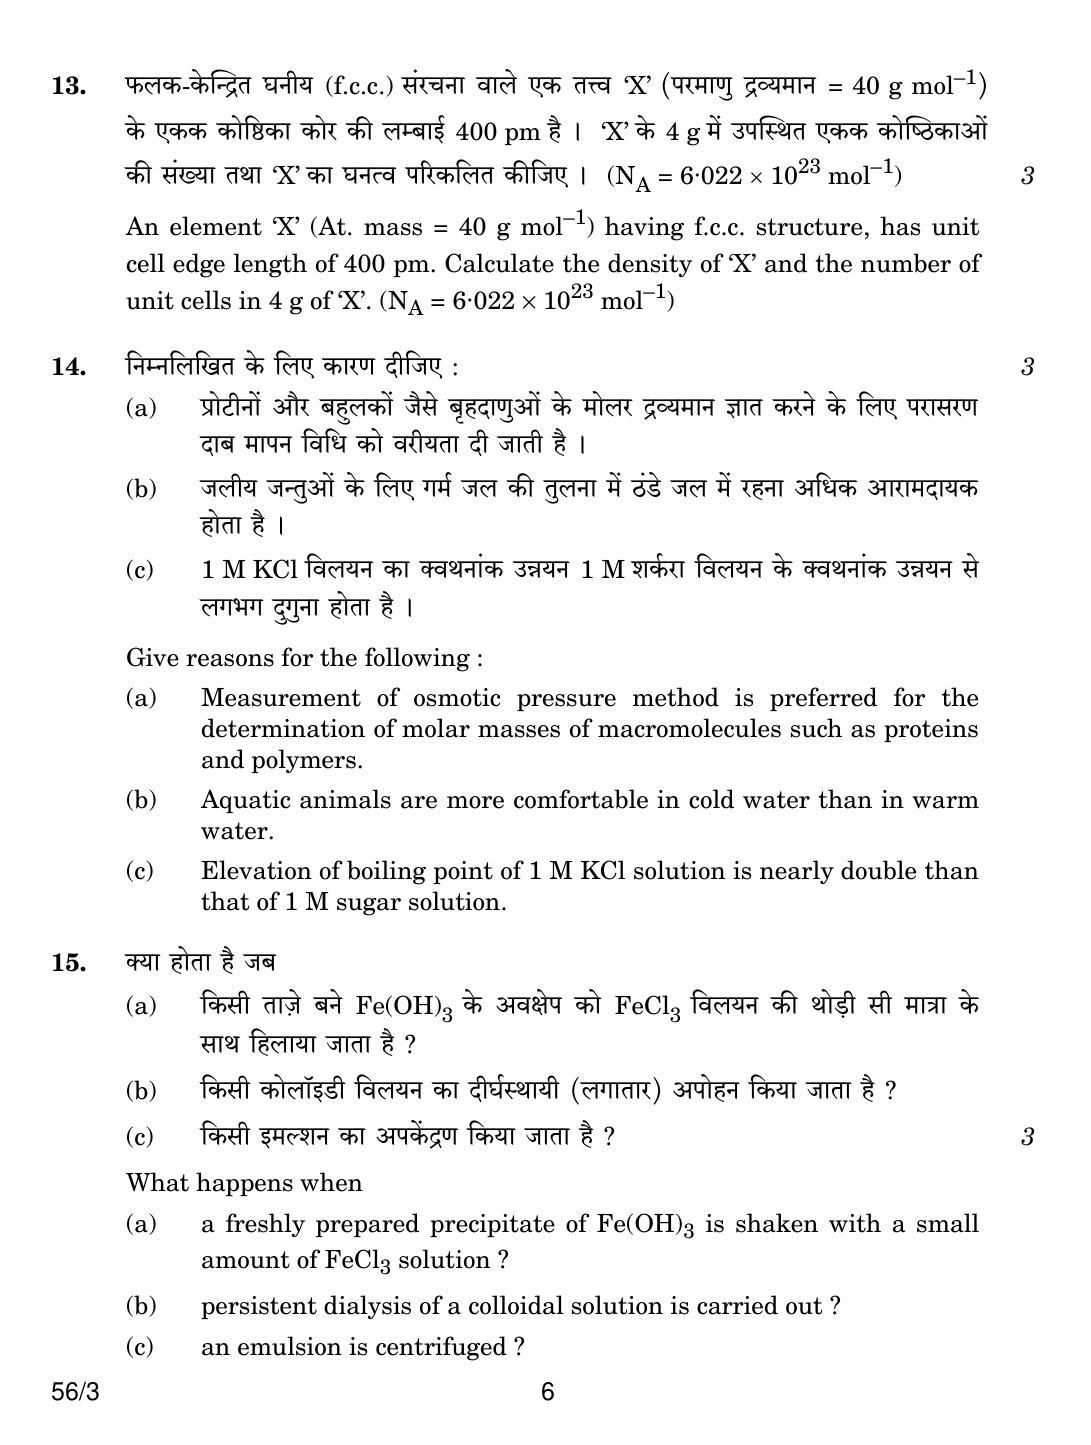 CBSE Class 12 56-3 CHEMISTRY 2018 Question Paper - Page 6